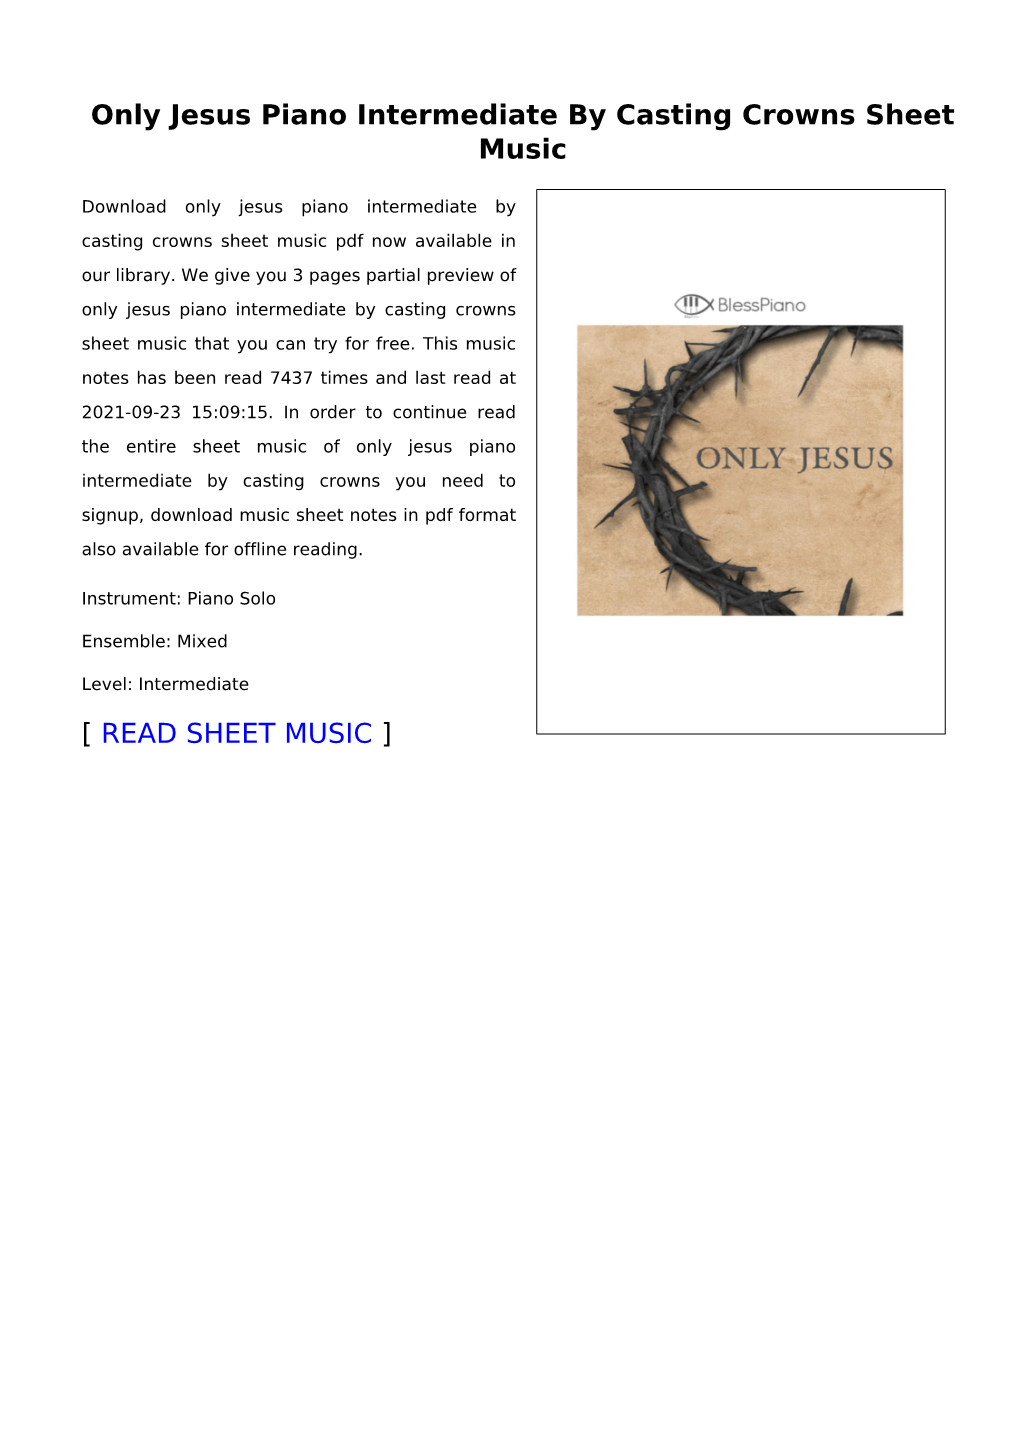 Only Jesus Piano Intermediate by Casting Crowns Sheet Music